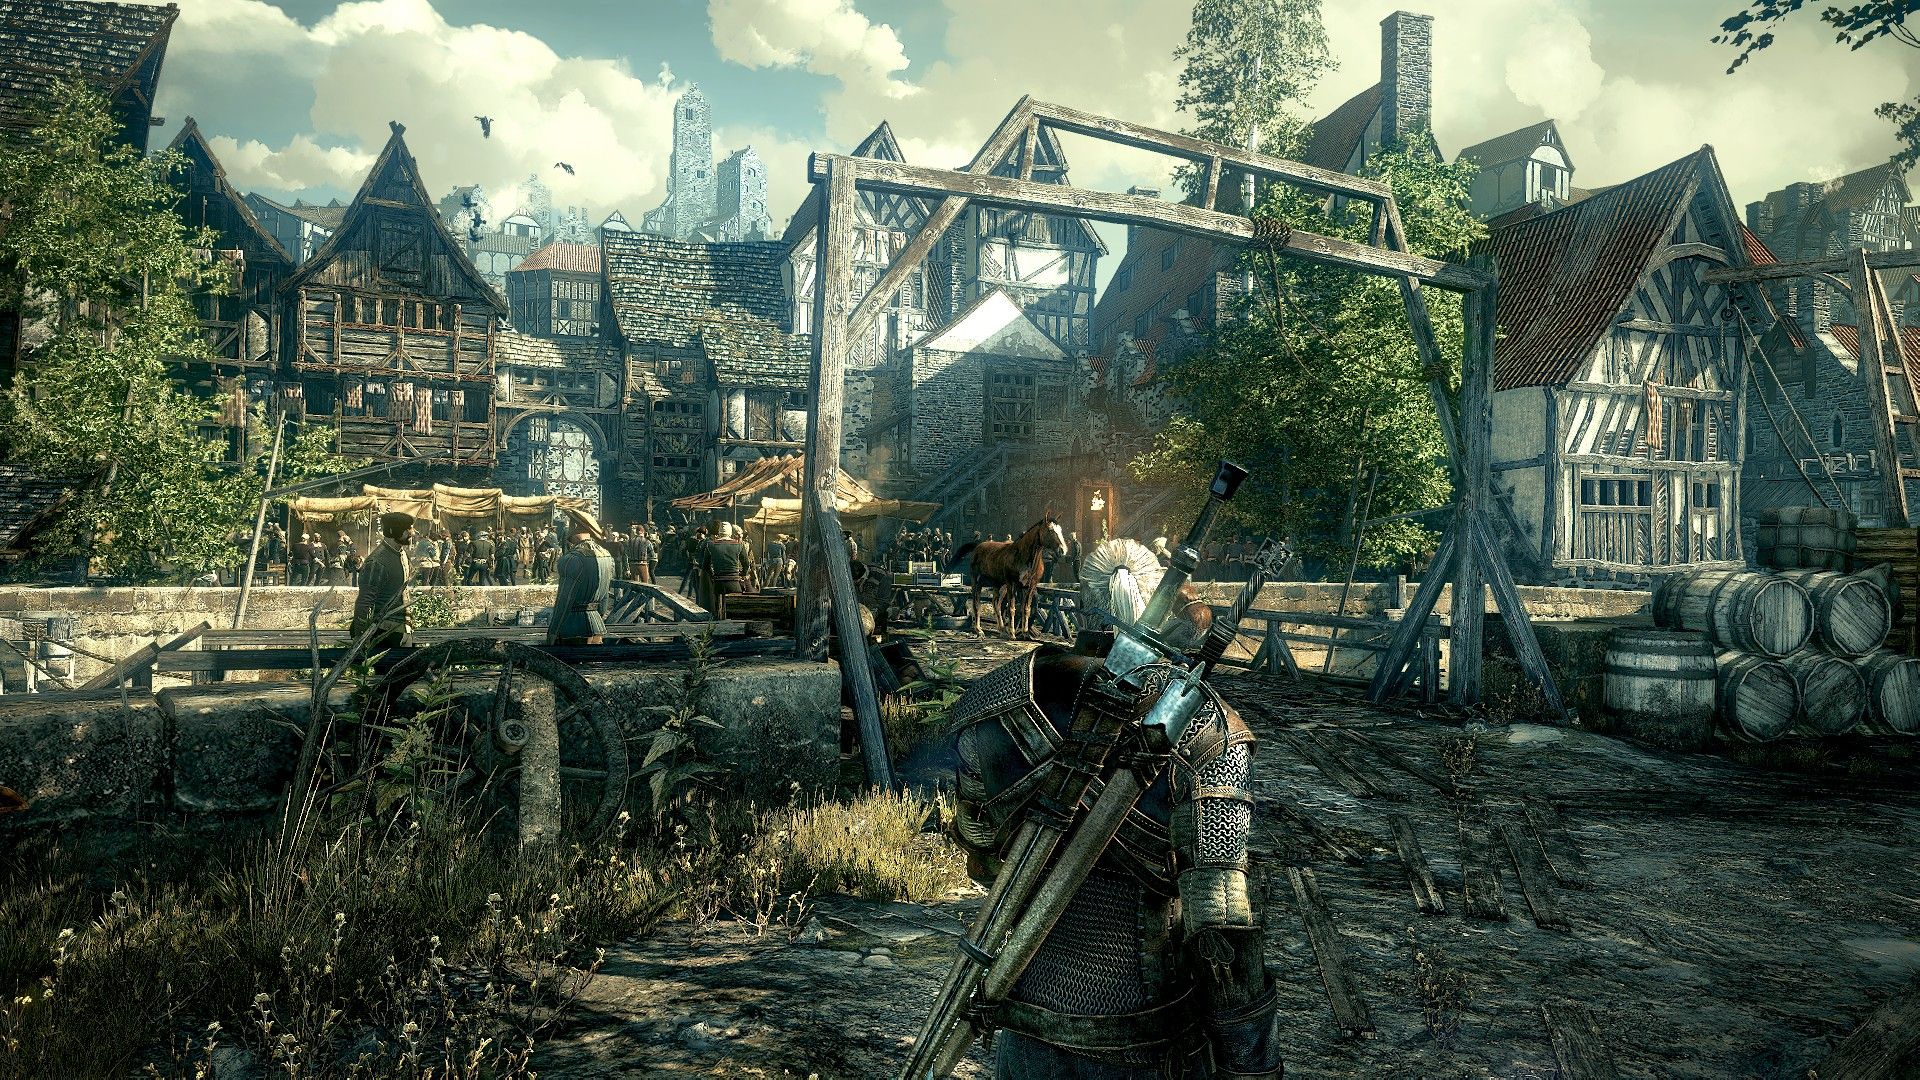 The Witcher: Wild Hunt (PC) 